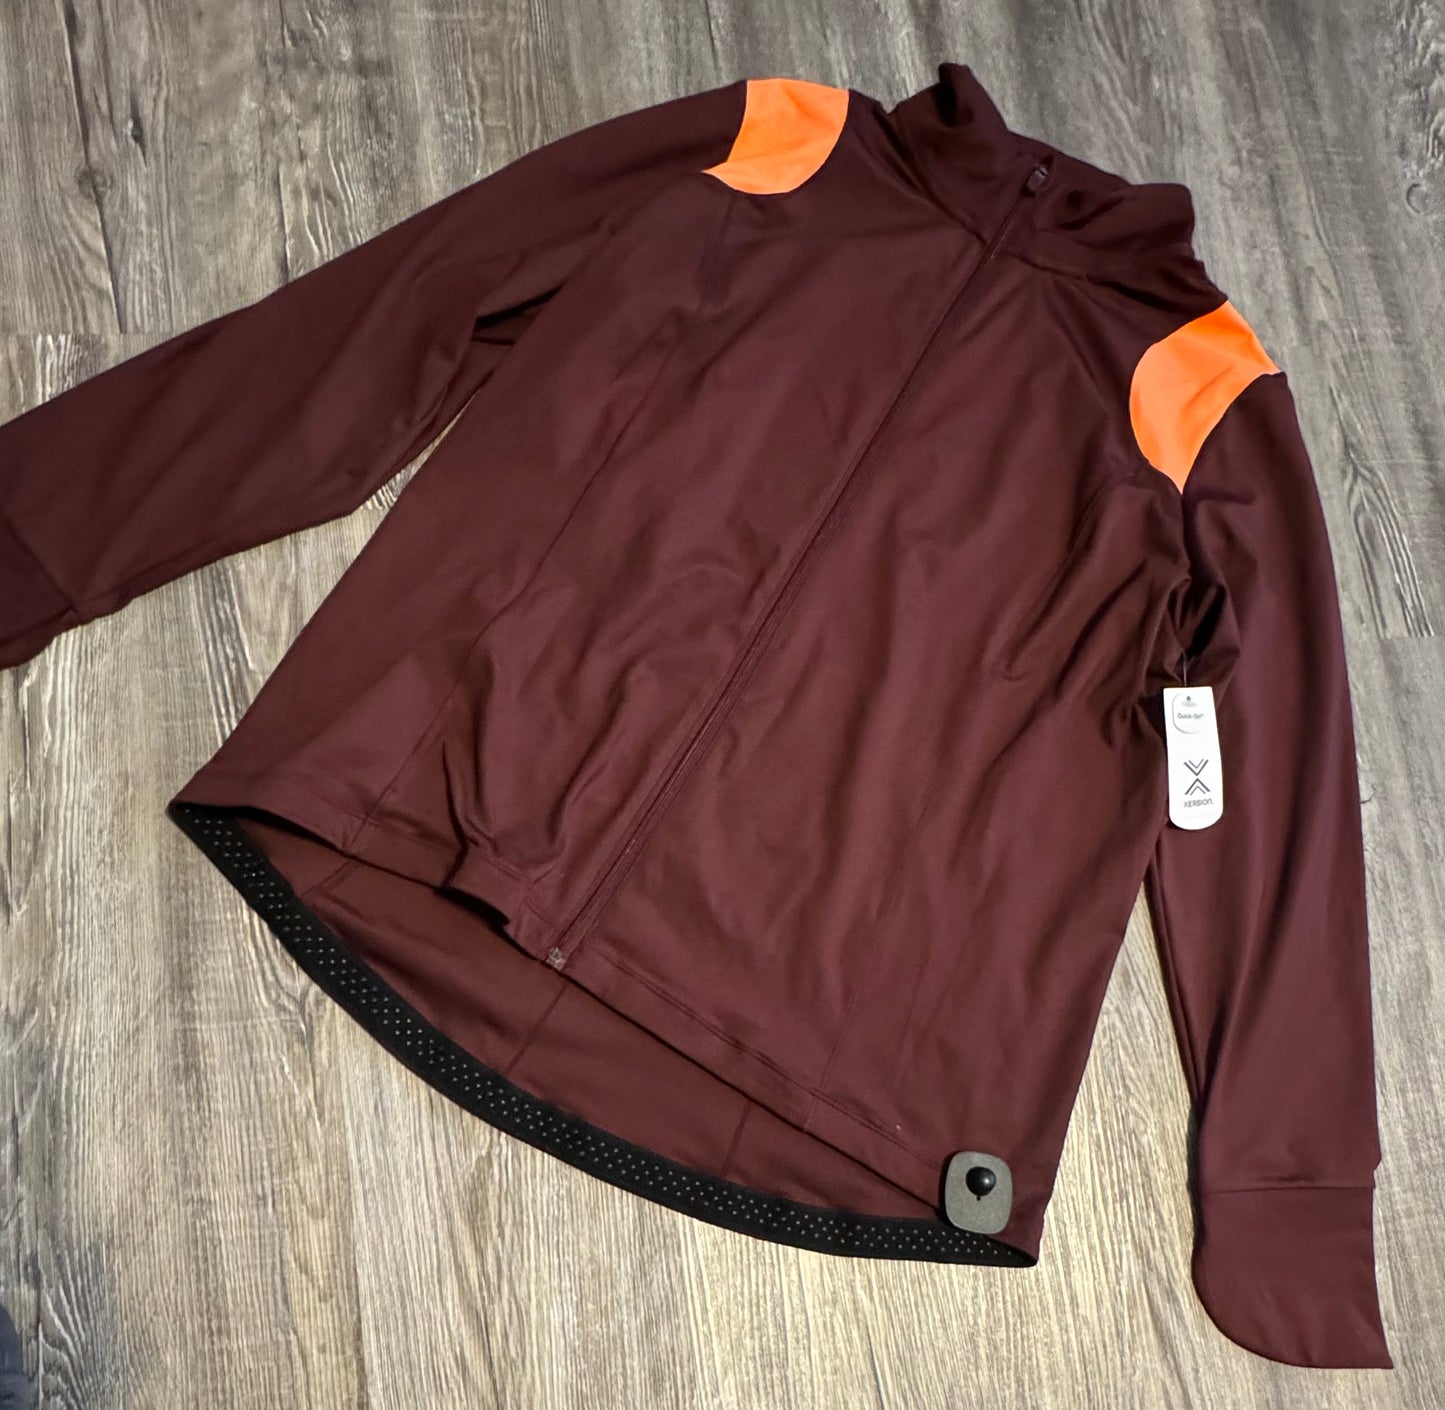 Athletic Jacket By Xersion  Size: Xxl